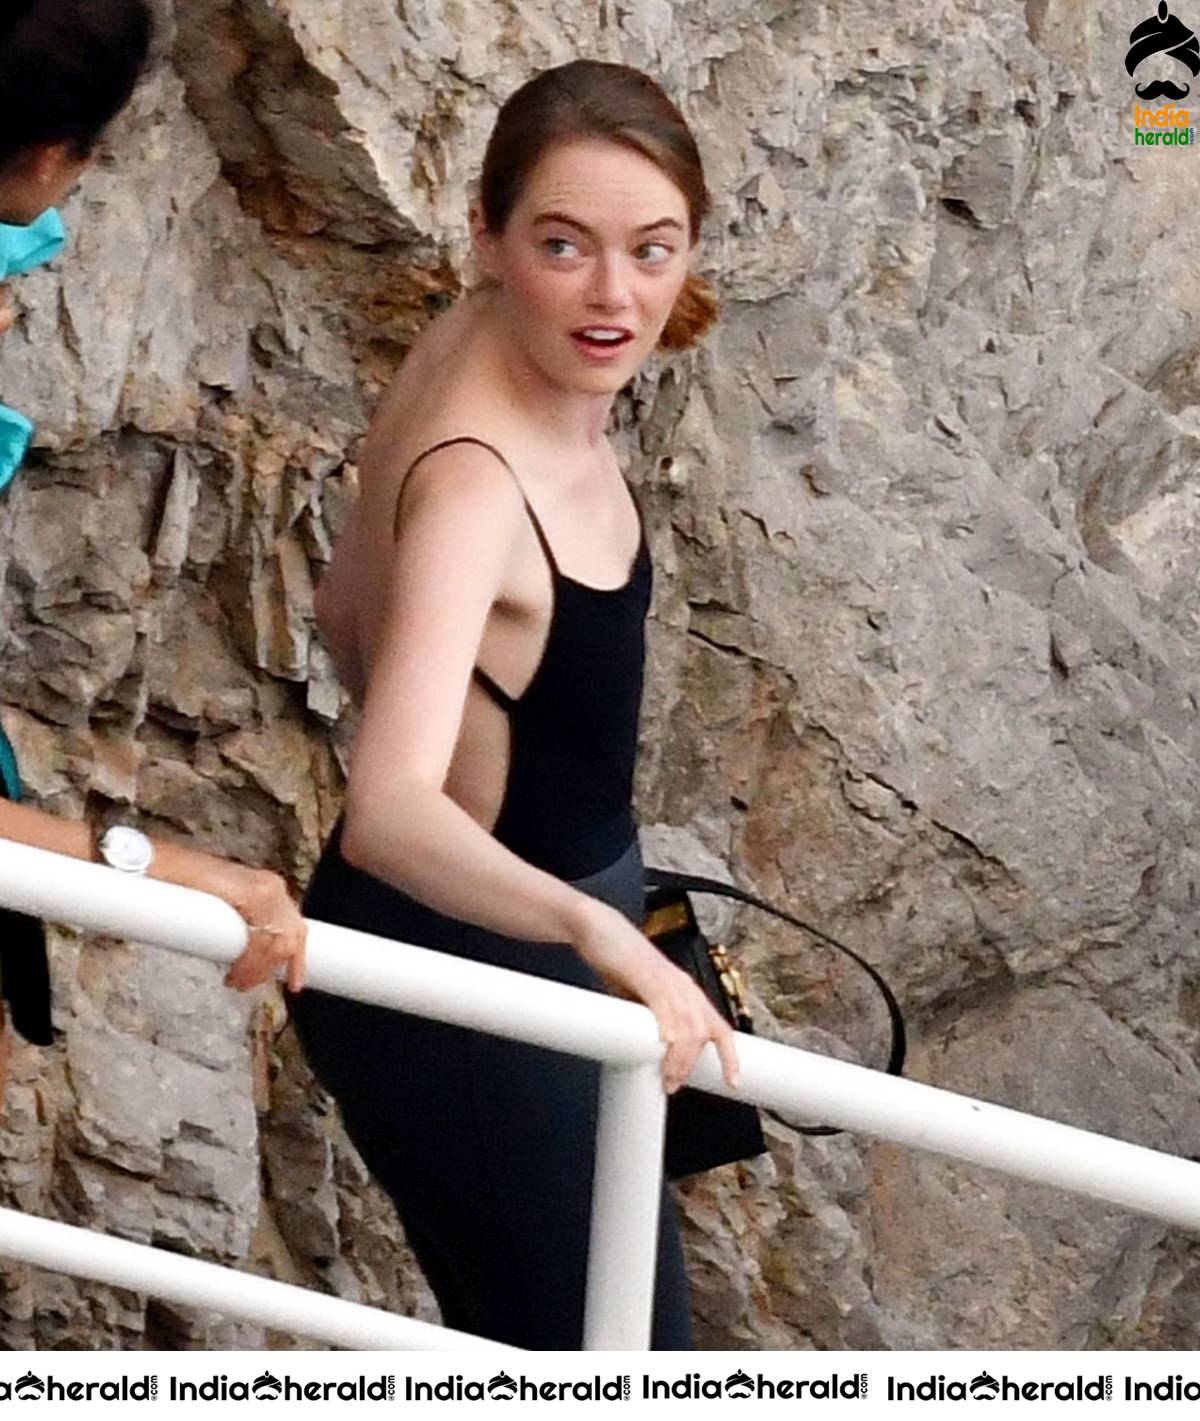 Emma Stone shooting an advertisement for Louis Vuitton in Italy Set 2